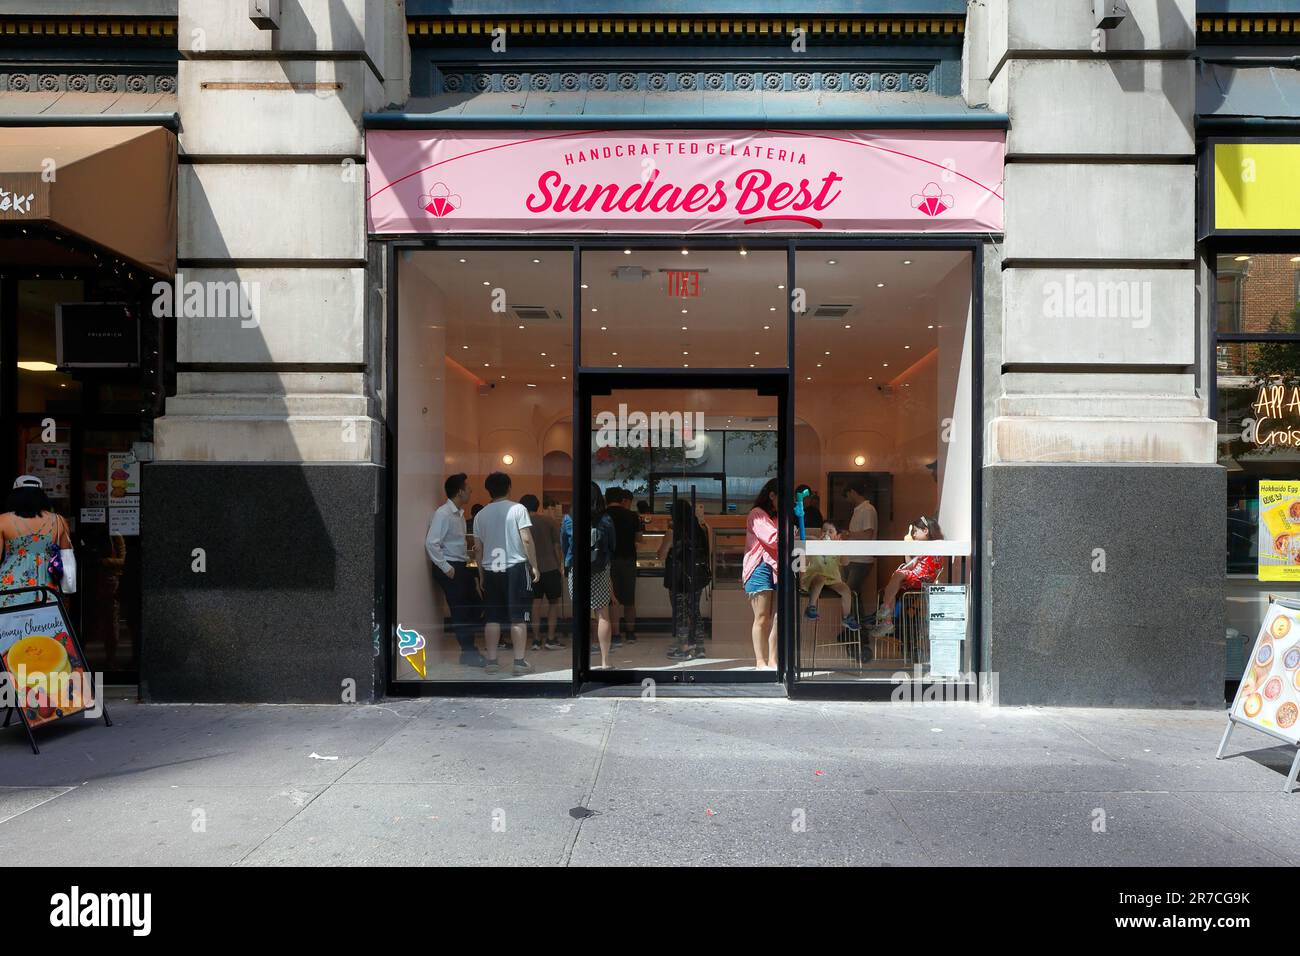 Sundaes Best, 315 5th Ave, New York, NYC storefront of a gelato shop with Asian flavors in Manhattan's Koreatown. Stock Photo